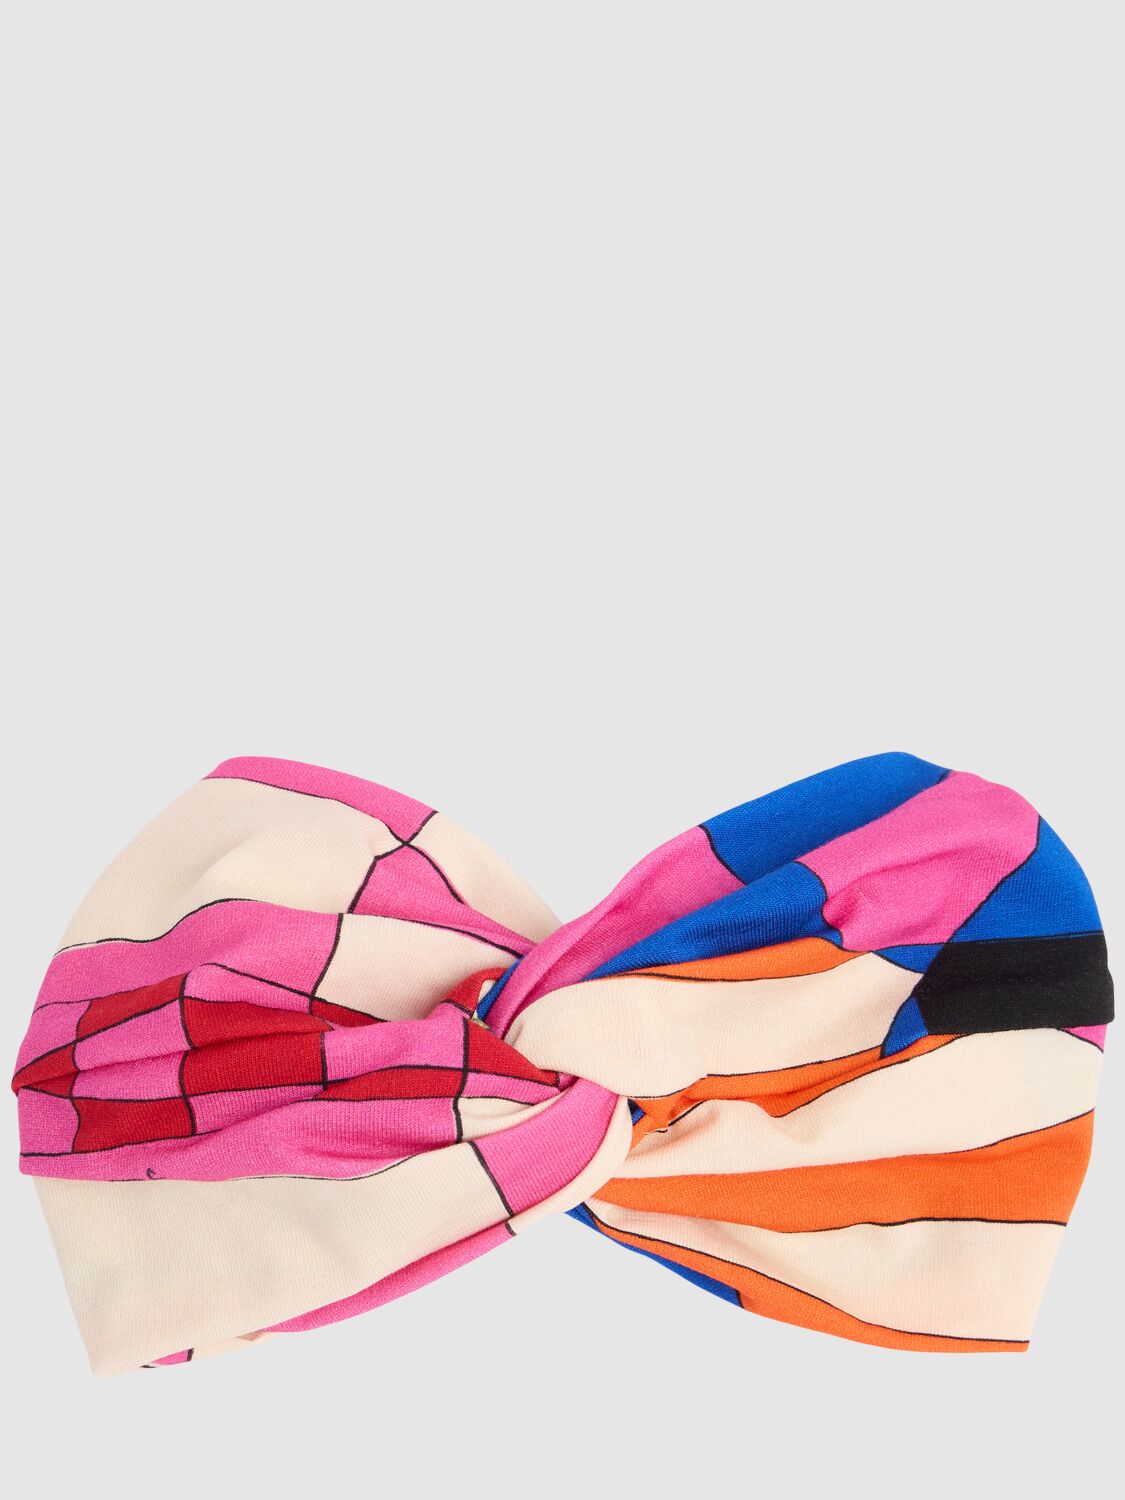 Pucci Kids' Printed Cotton Jersey Headband In Pink